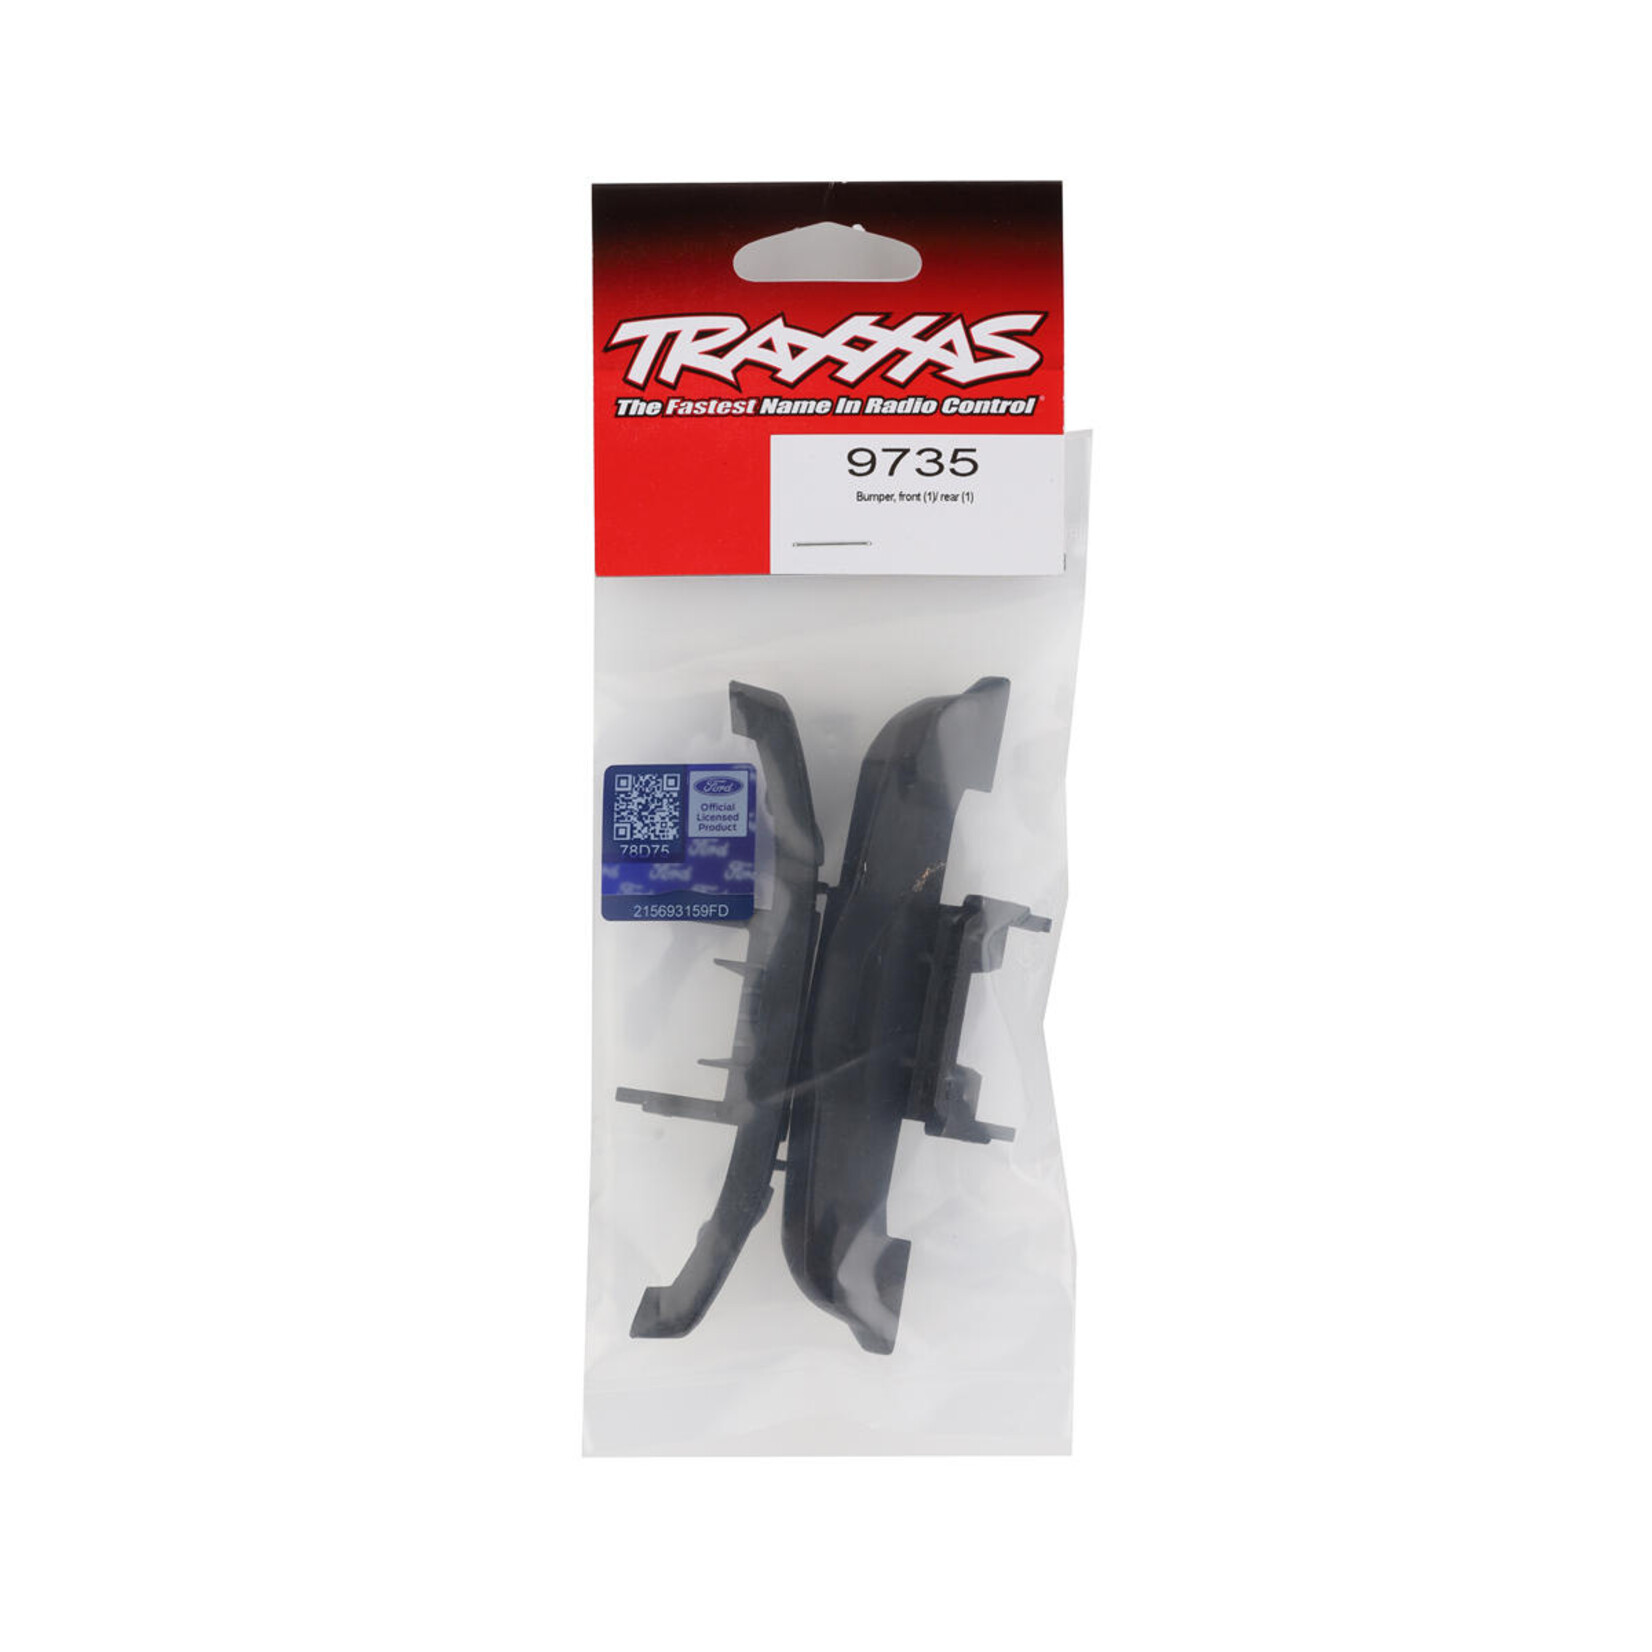 Traxxas Traxxas TRX-4M Ford Bronco Front/Rear Bumpers #9735